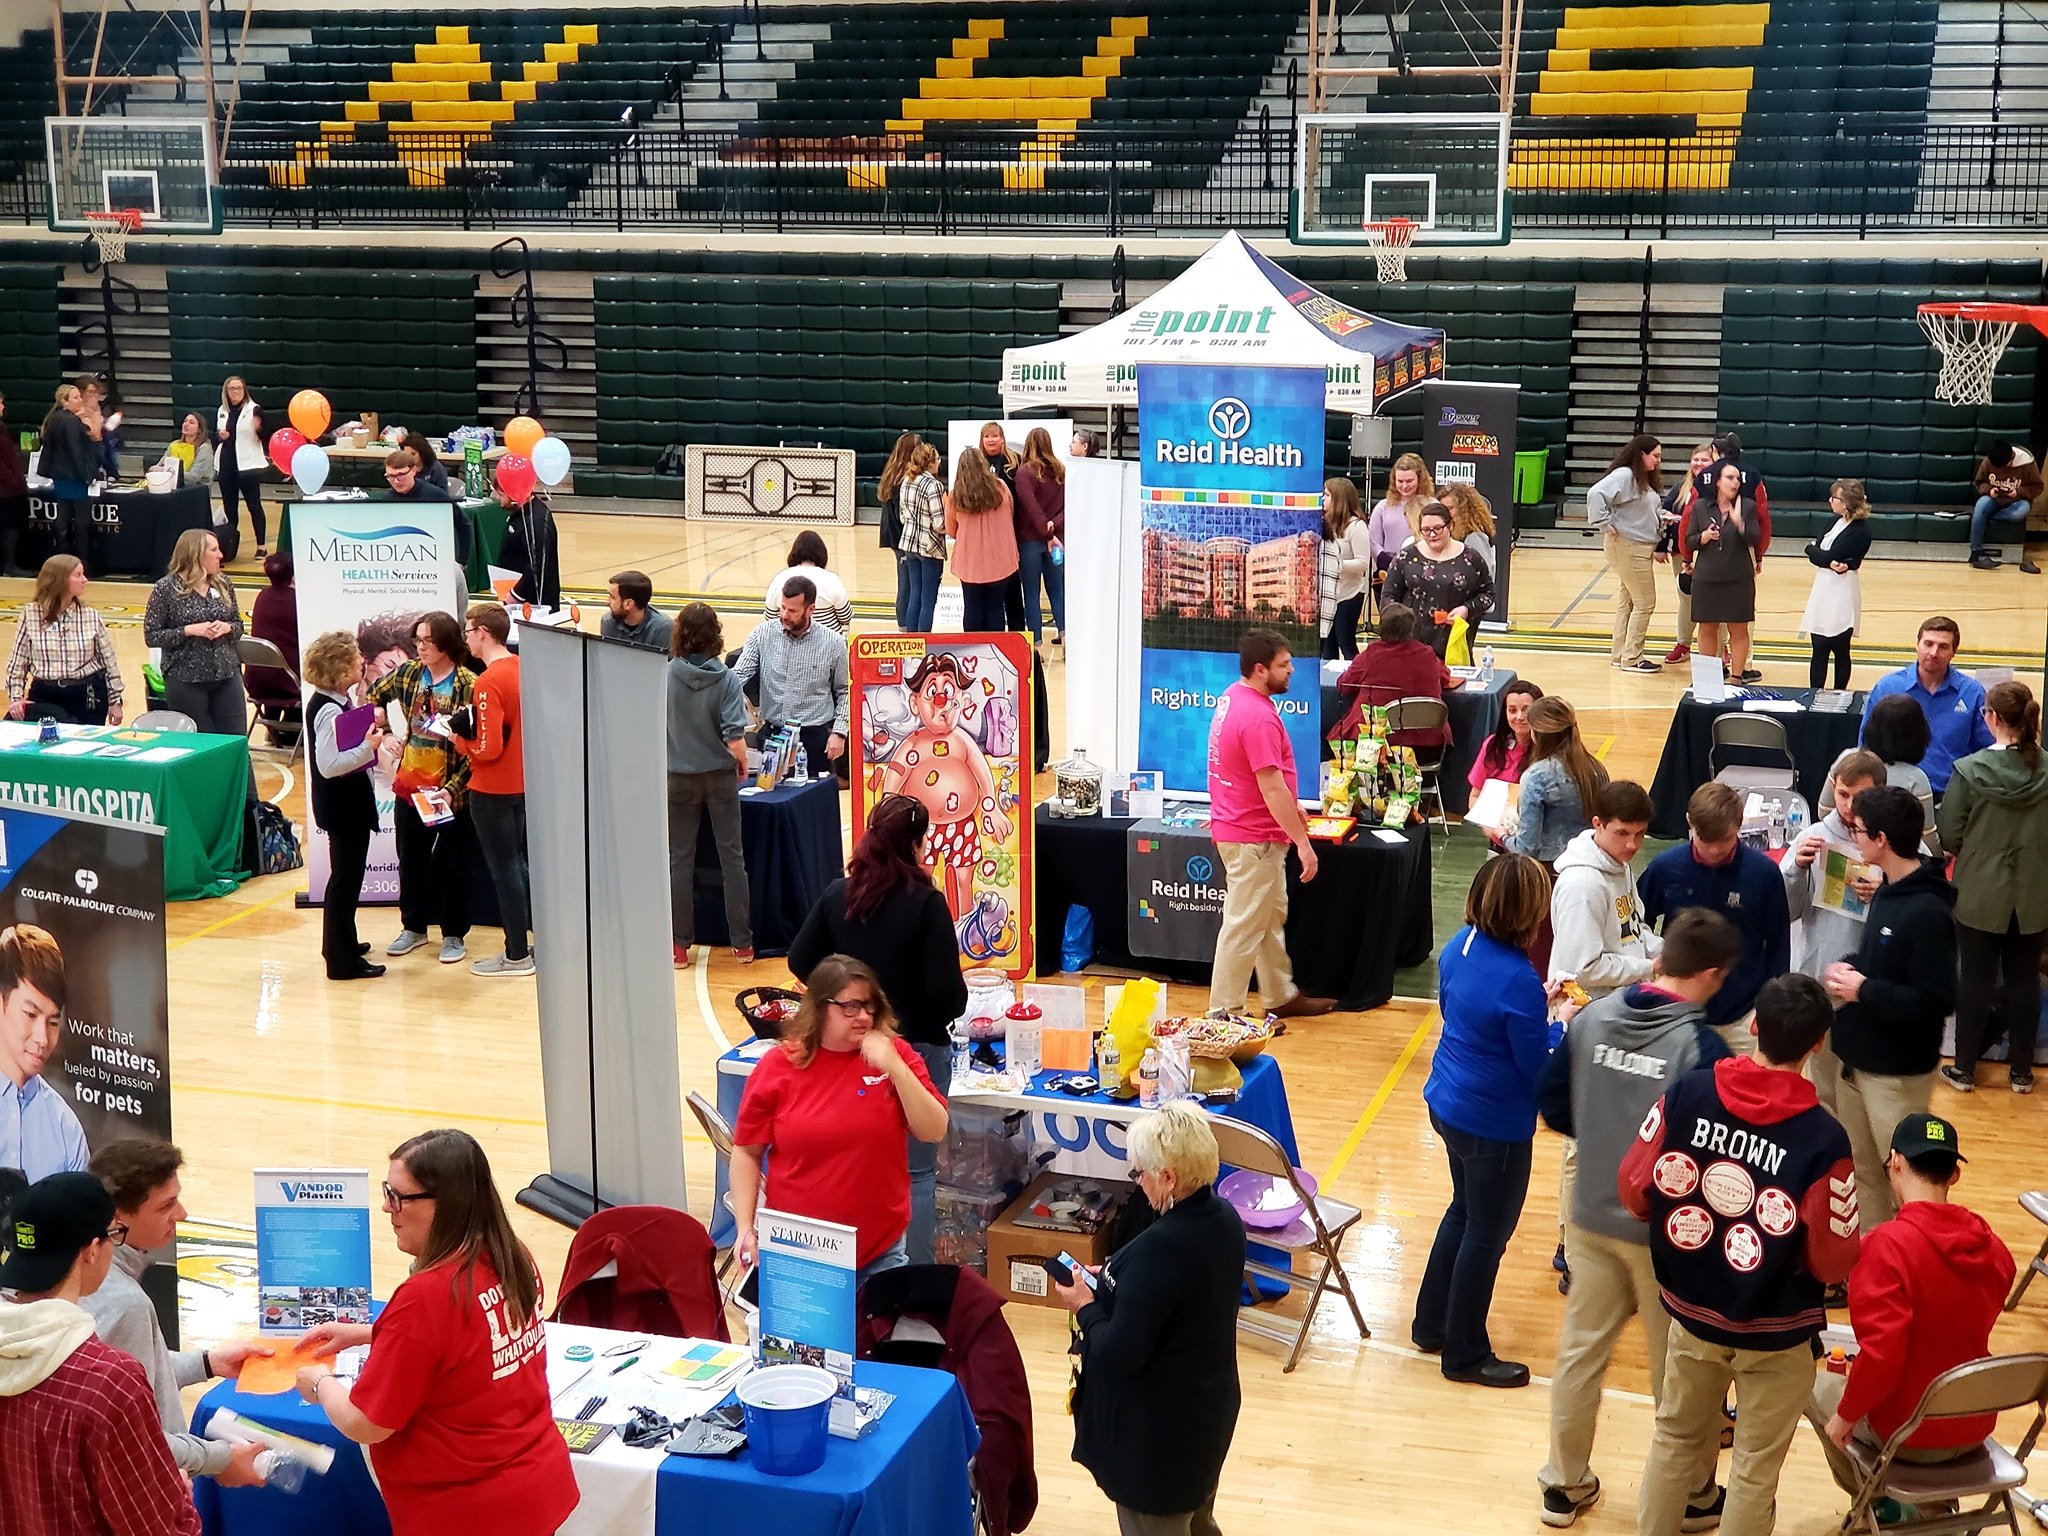 A job fair held in a highschool gym in East Central Indiana